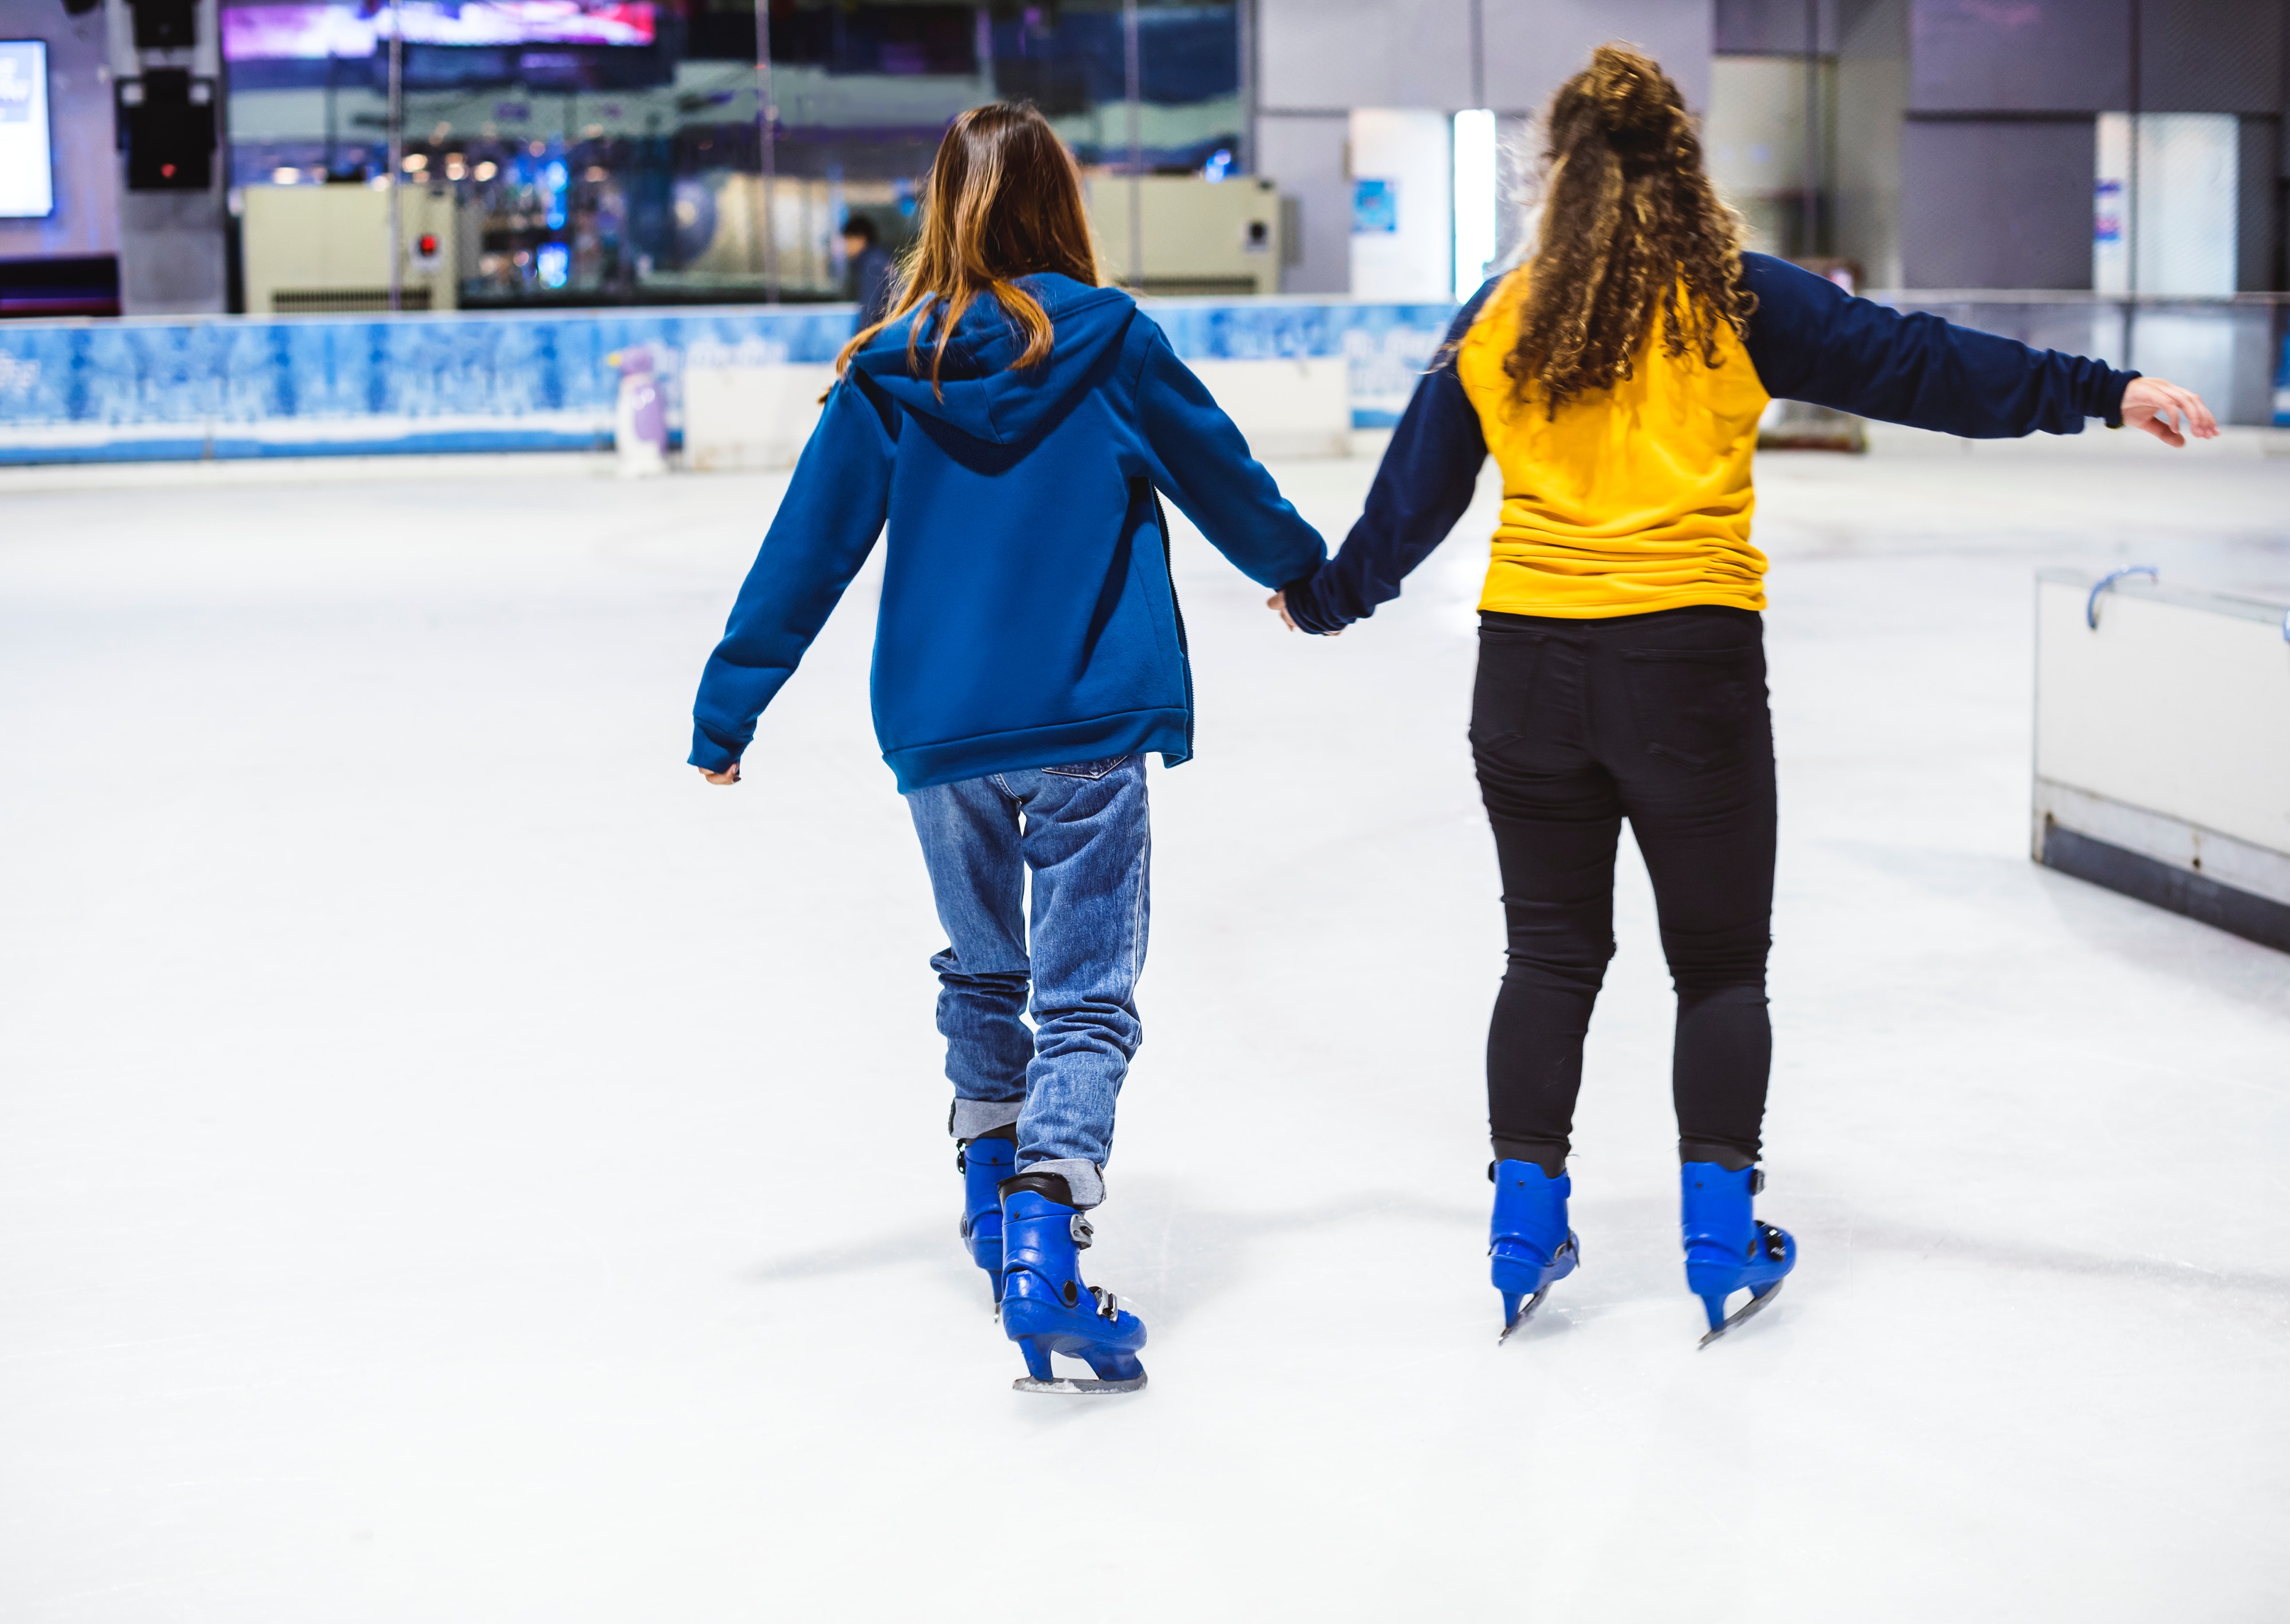  Opening hours and prices for recreational ice skating in front of Zetra